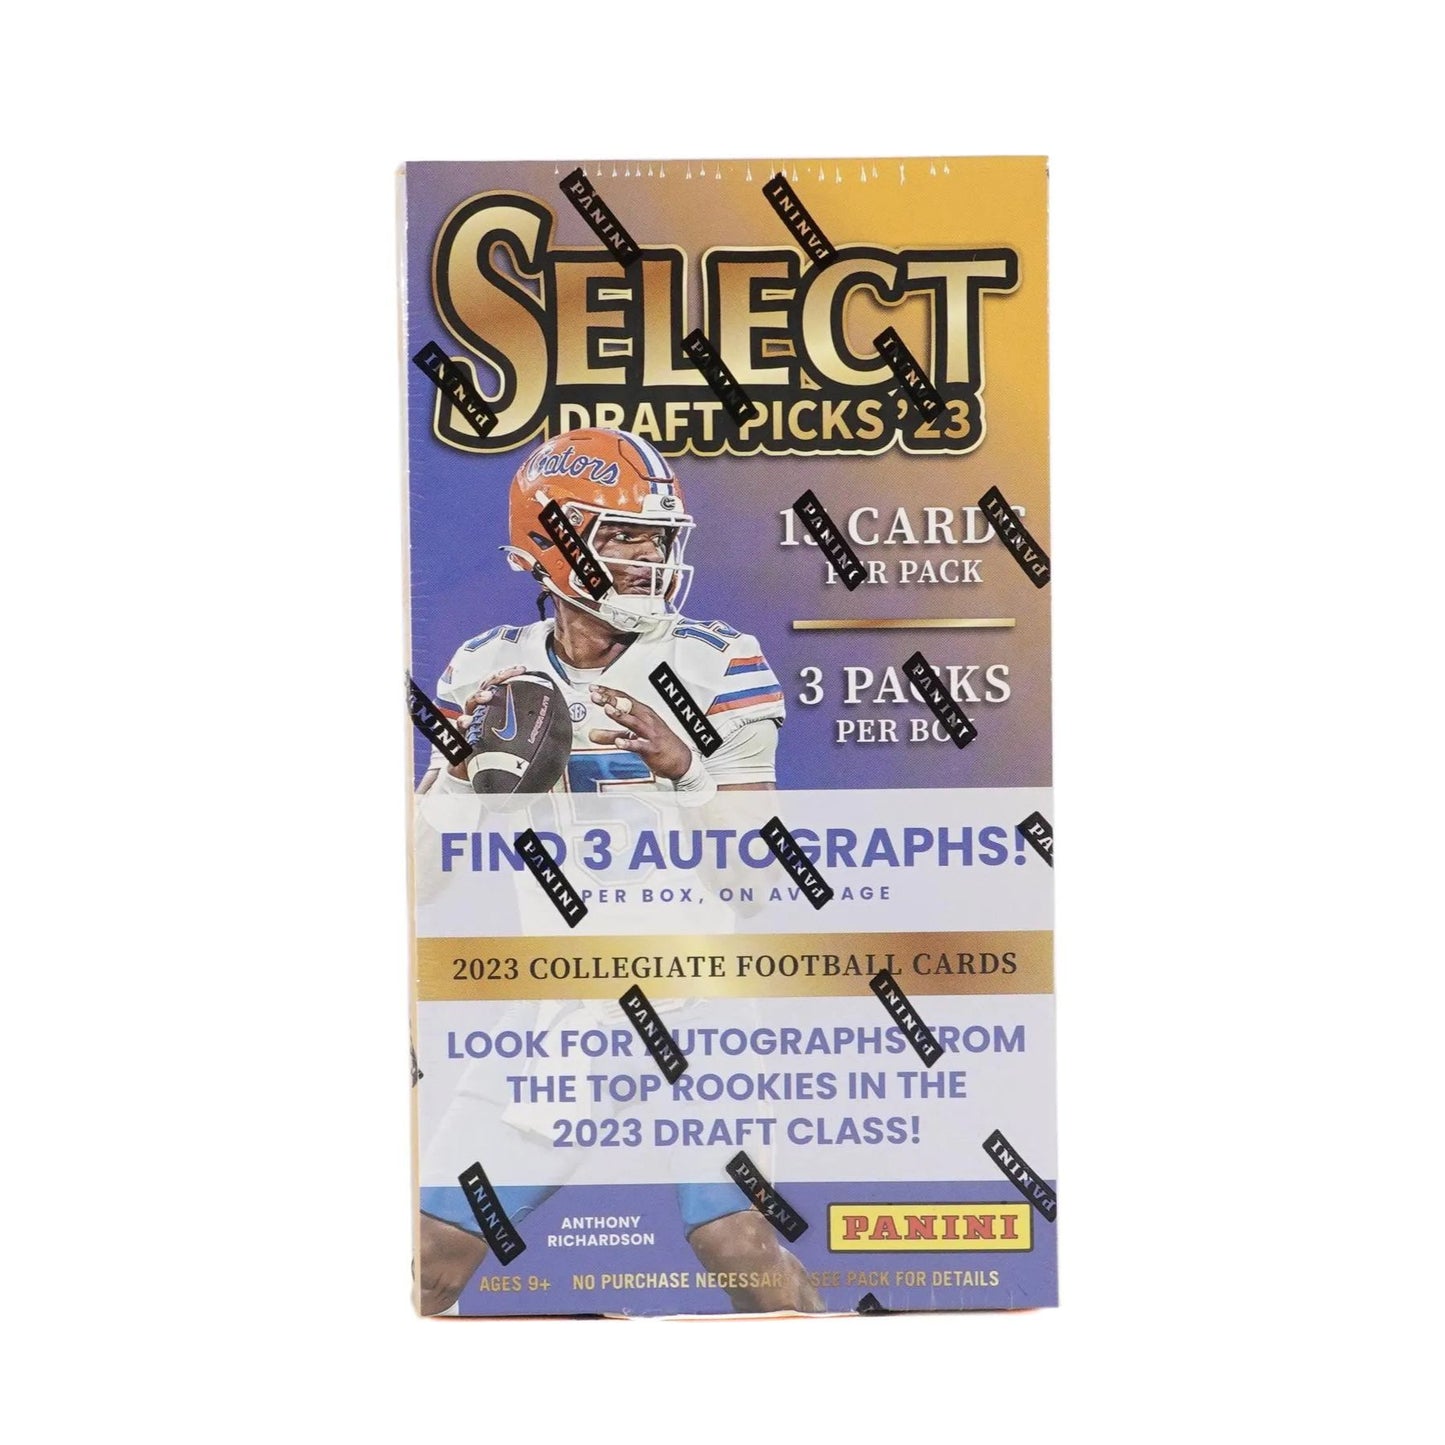 Image shows a 2023 Panini Select Draft Picks Collegiate Football Cards Box, promising an exciting mix of autographed cards, silver prizm parallels, and hobby-exclusive inserts from stars of the 2023 NFL Draft class and legendary performers.